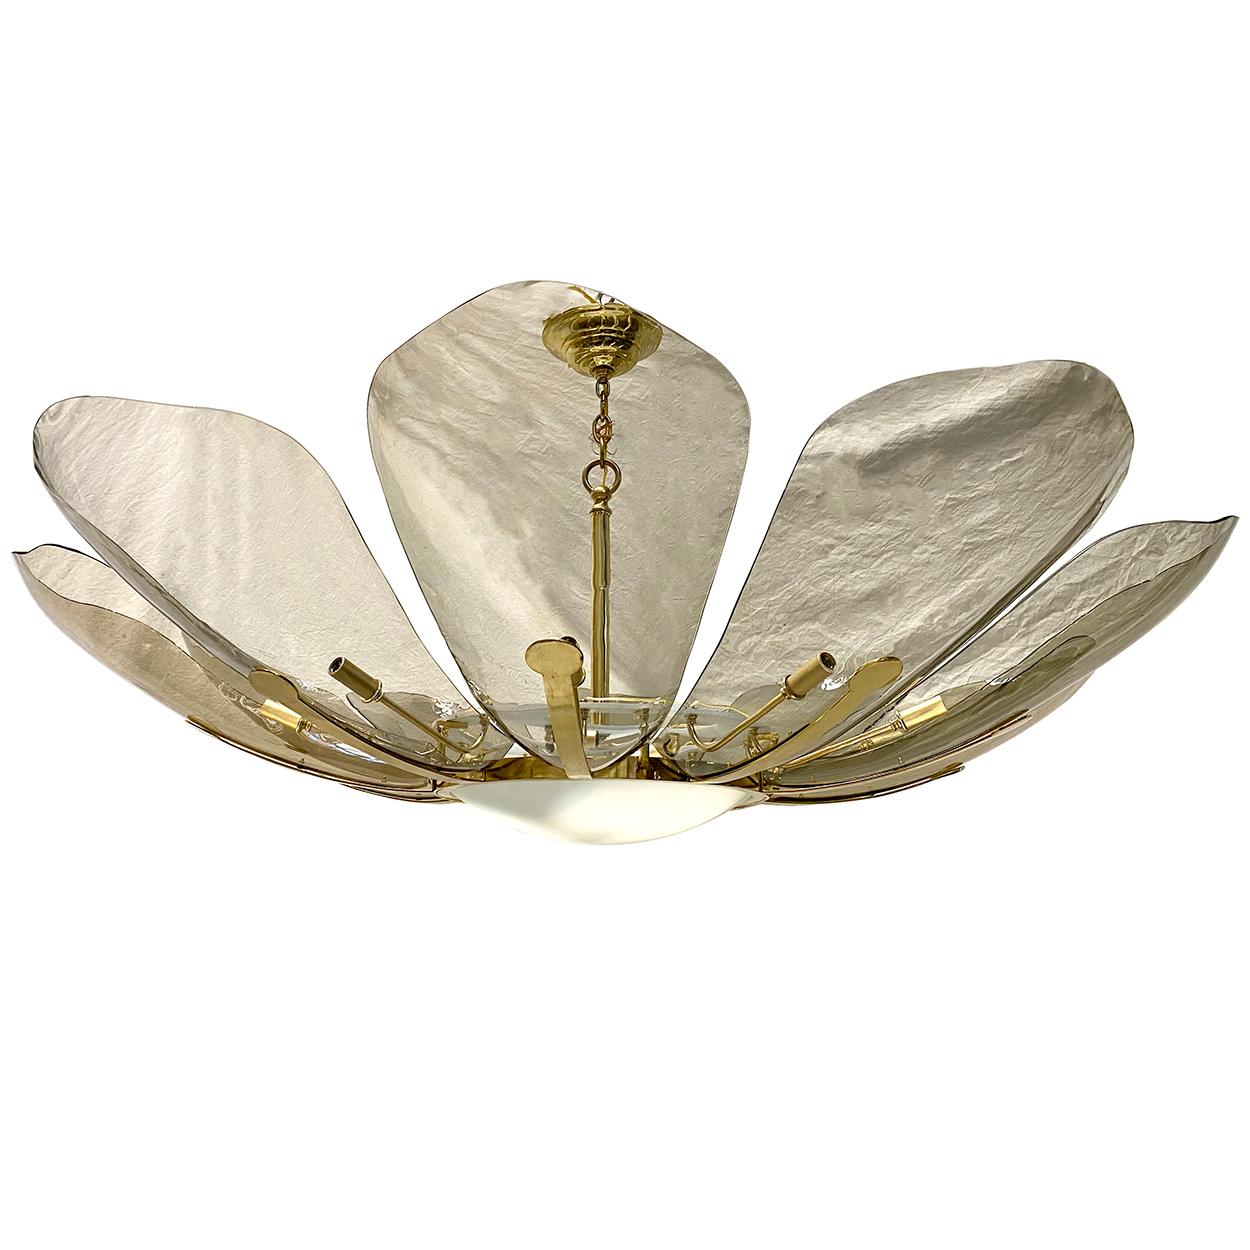 A circa 1960's Italian molded glass light fixture with ten lights on the petals and three in the interior.

Measurements:
Diameter: 56